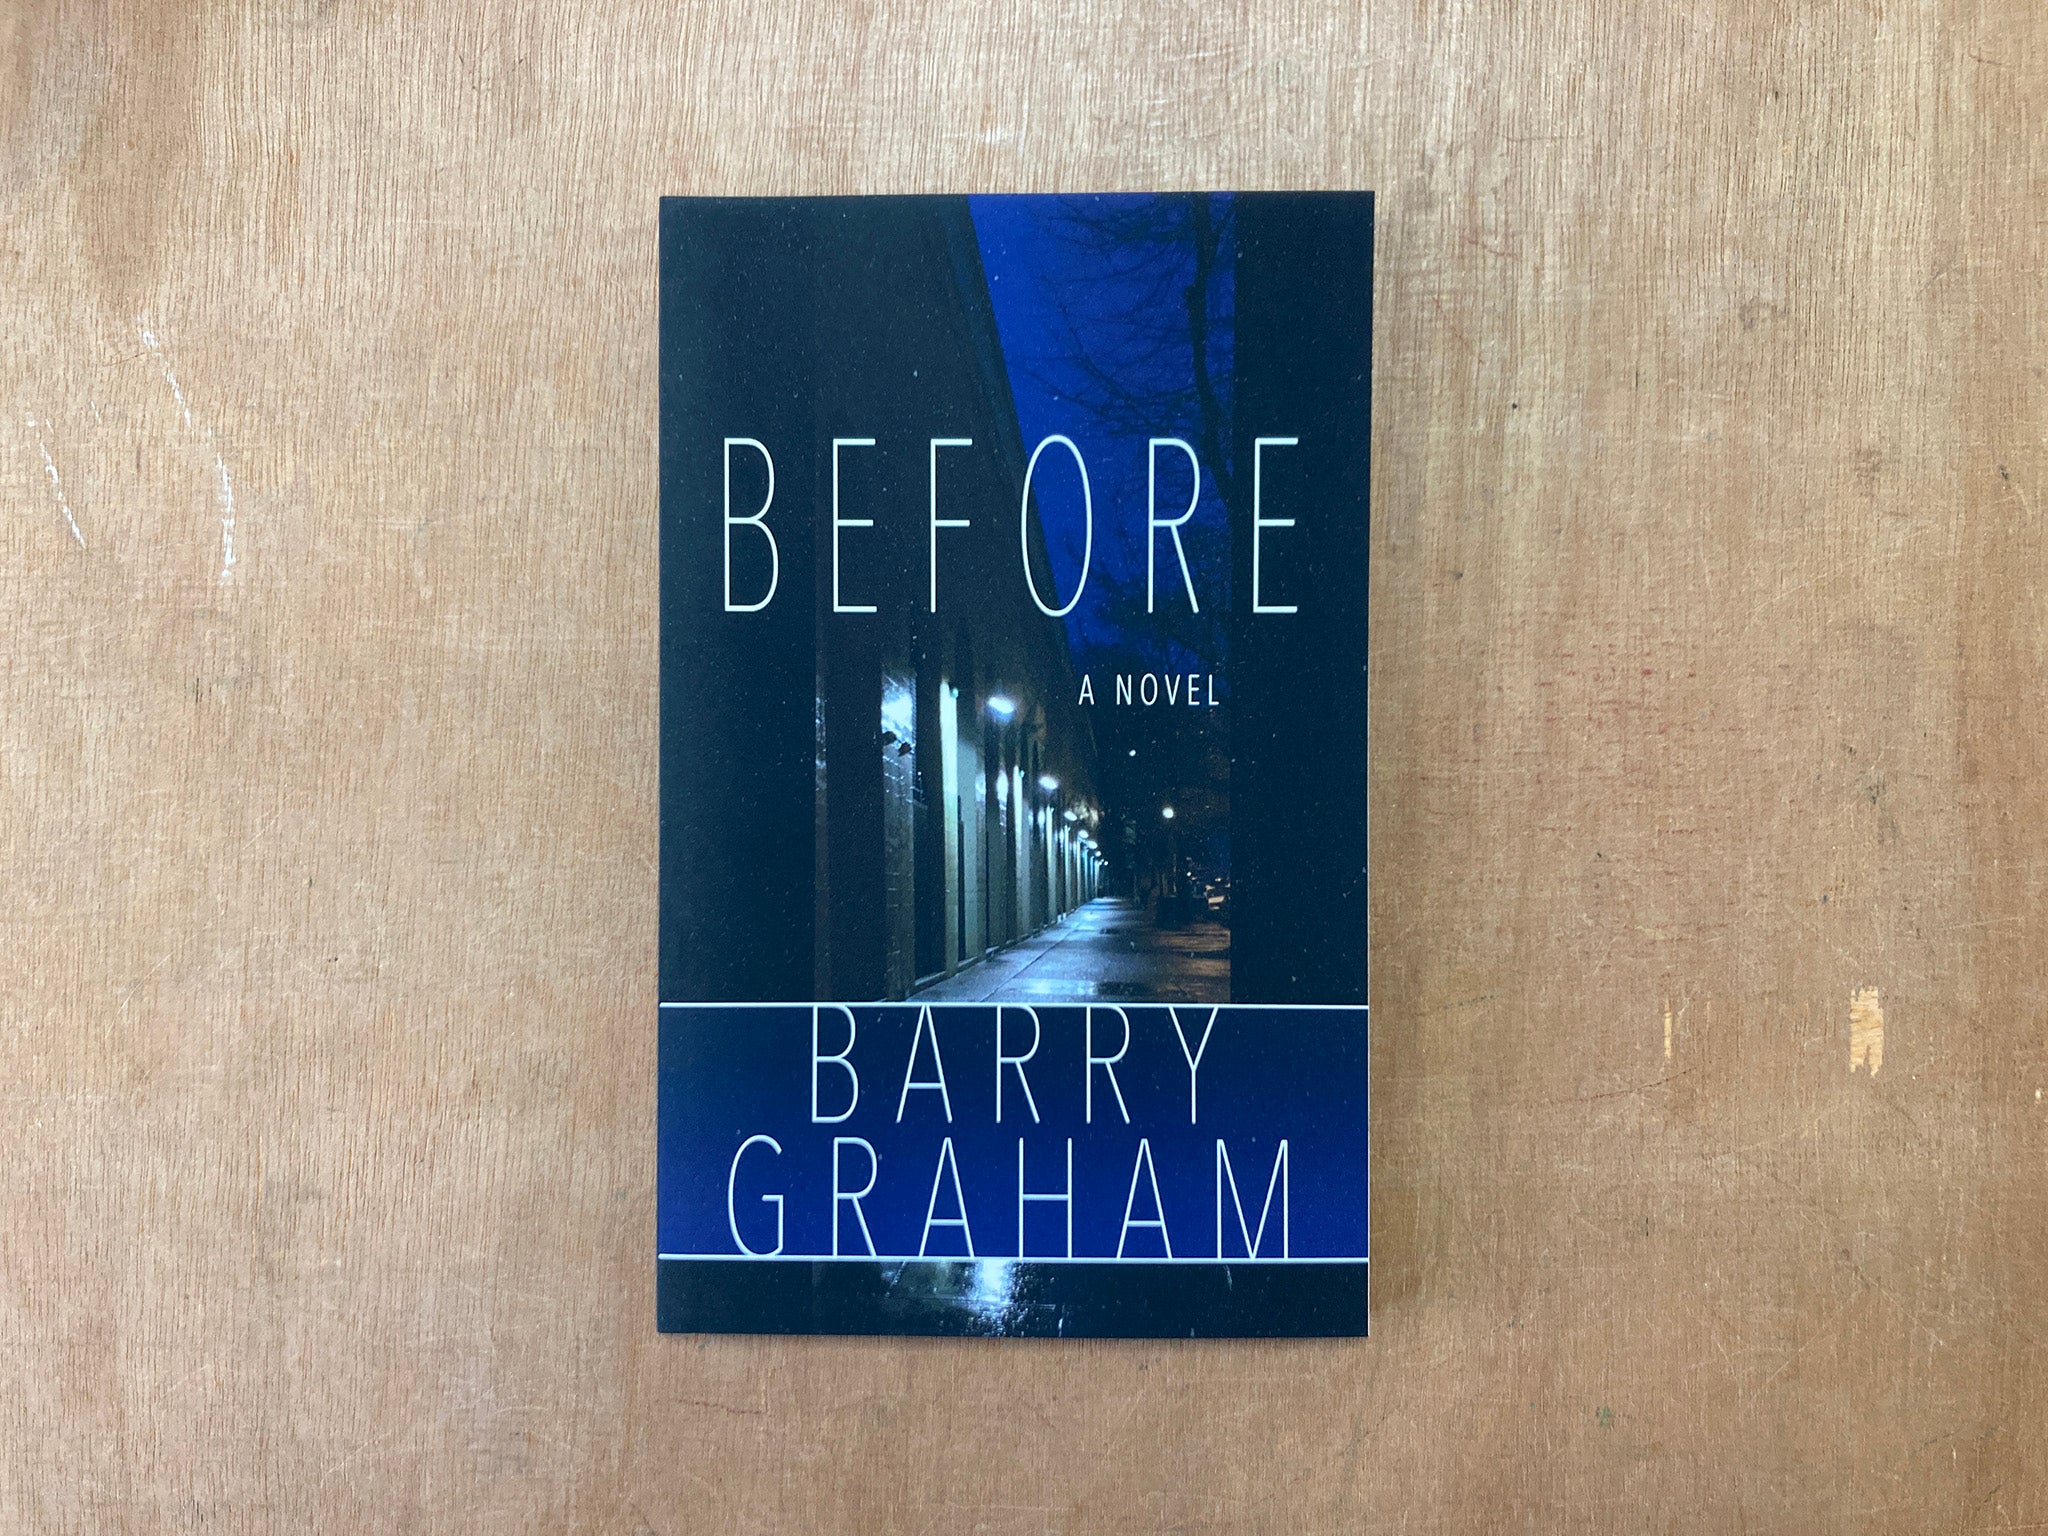 BEFORE by Barry Graham